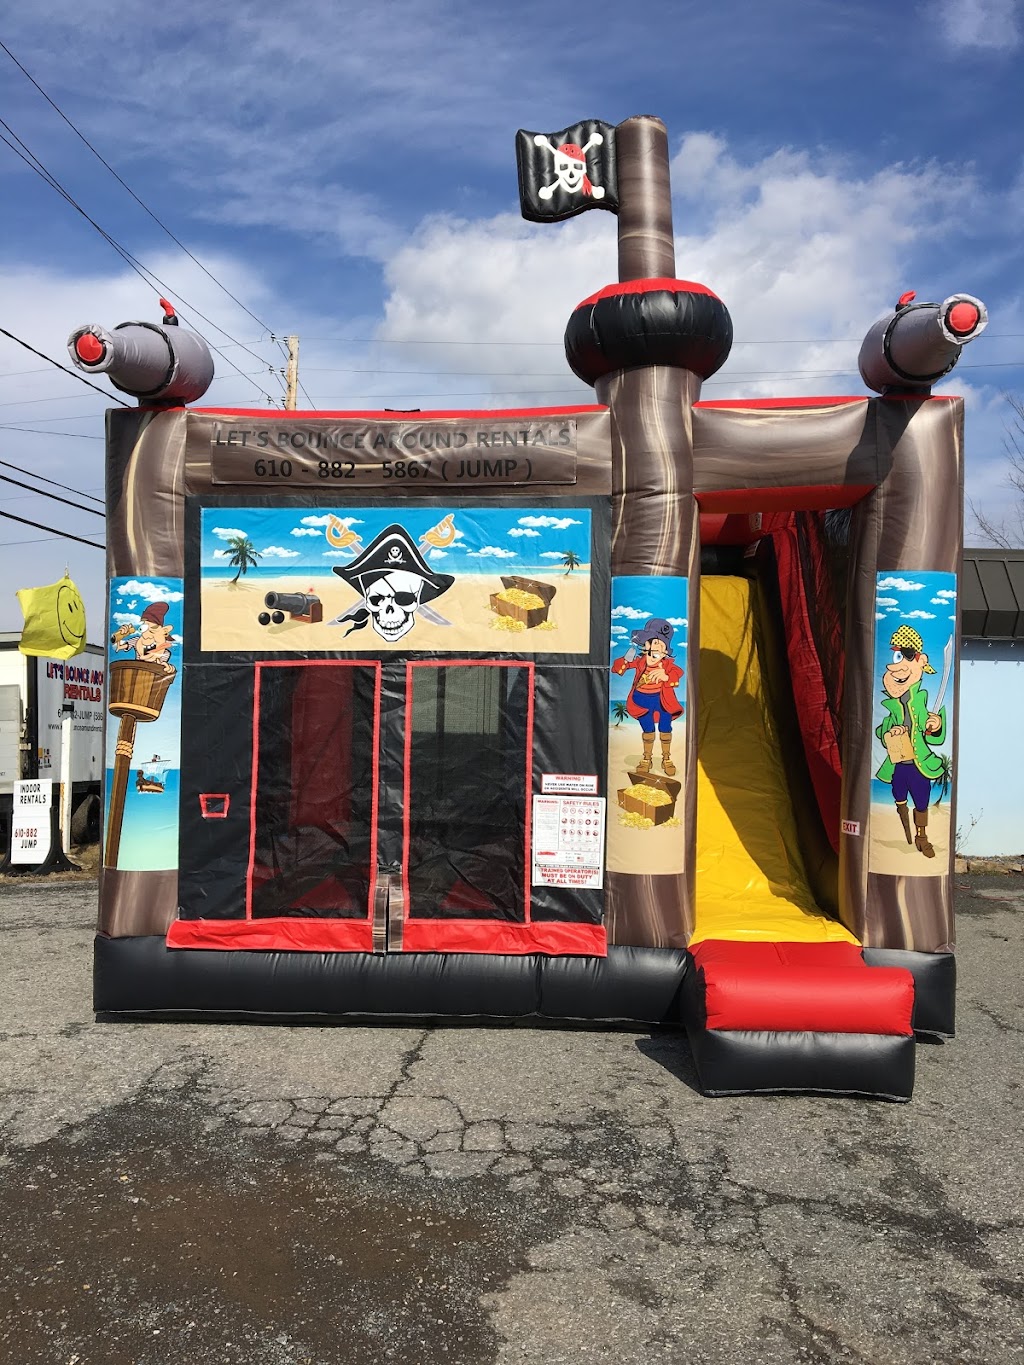 Lets Bounce Around Rentals | 217 S 3rd St, Coopersburg, PA 18036 | Phone: (610) 882-5867